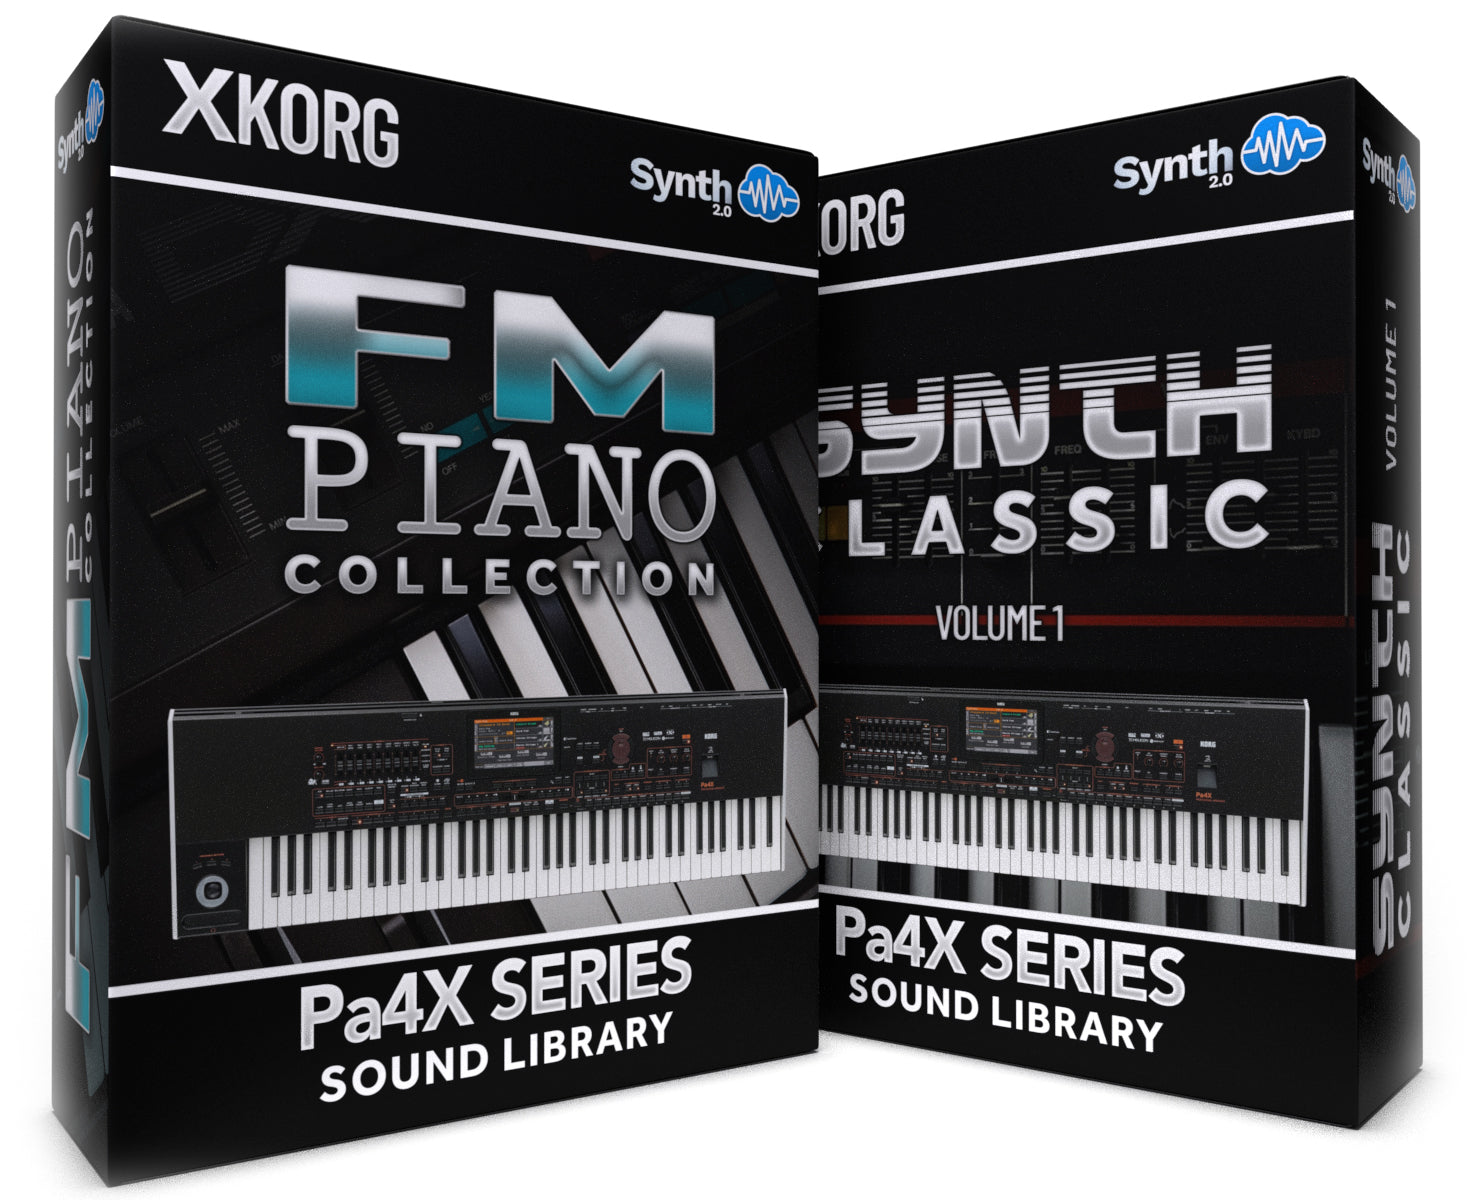 SCL106 - ( Bundle ) - FM Piano Collection + Synth Classic Vol.1 - Korg PA4x Series